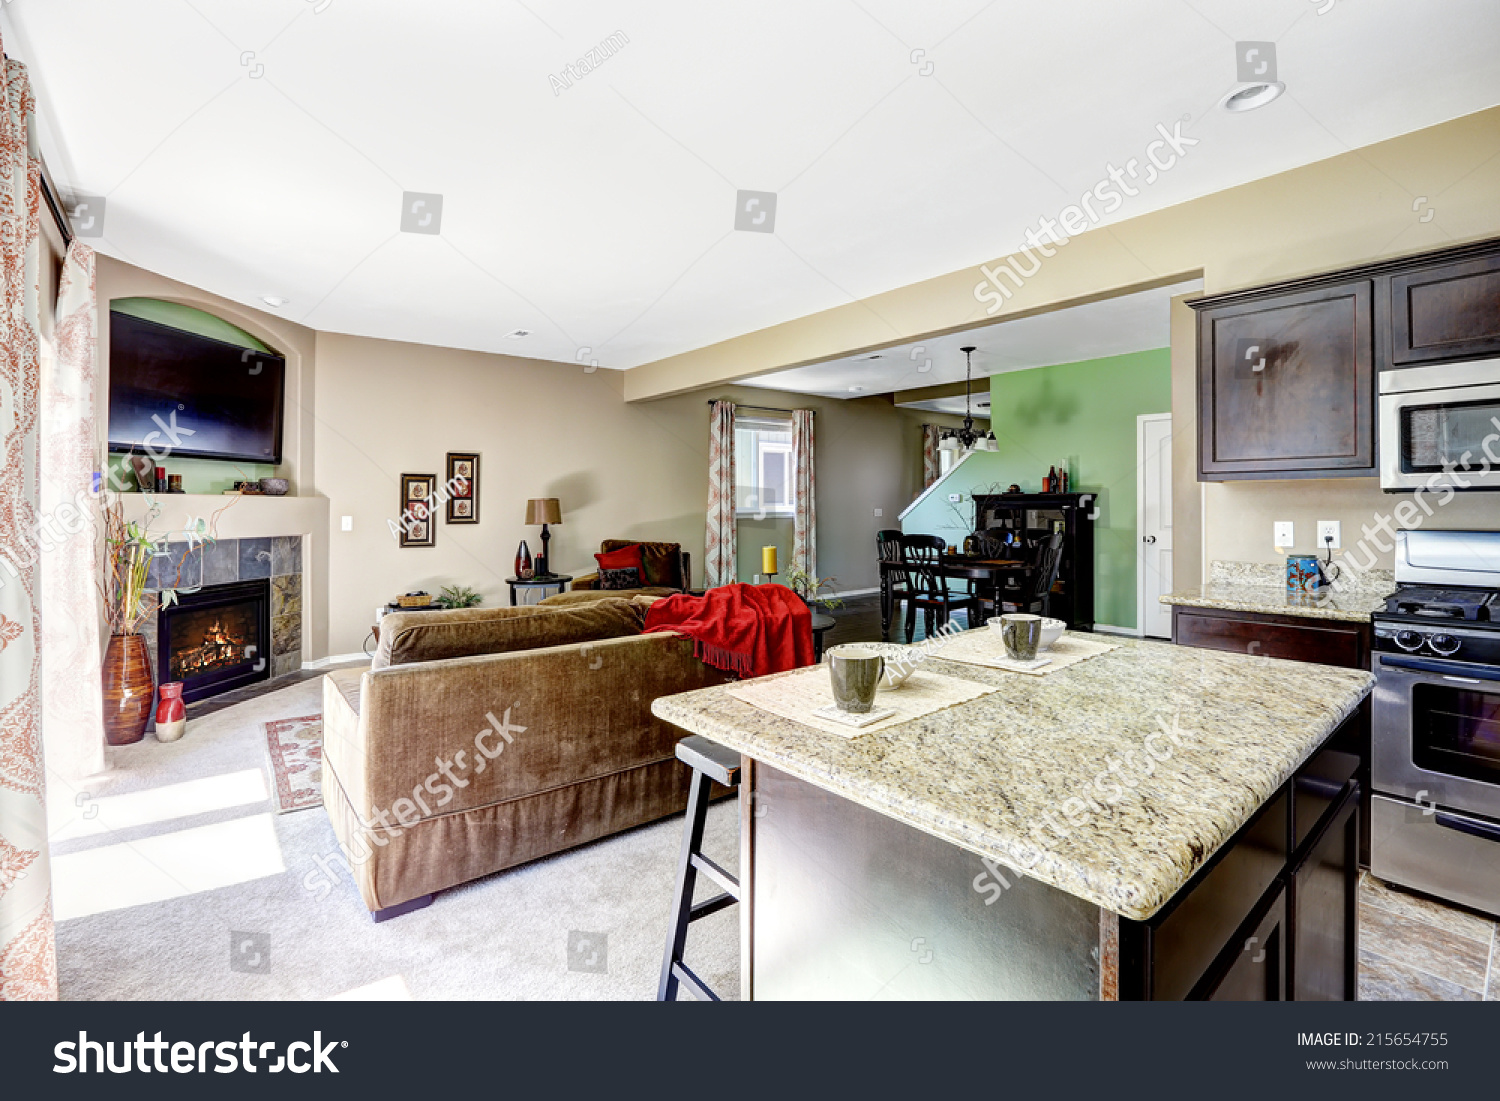 House interior with open floor plan. View of kitchen island with granite top and living room with fireplace #215654755